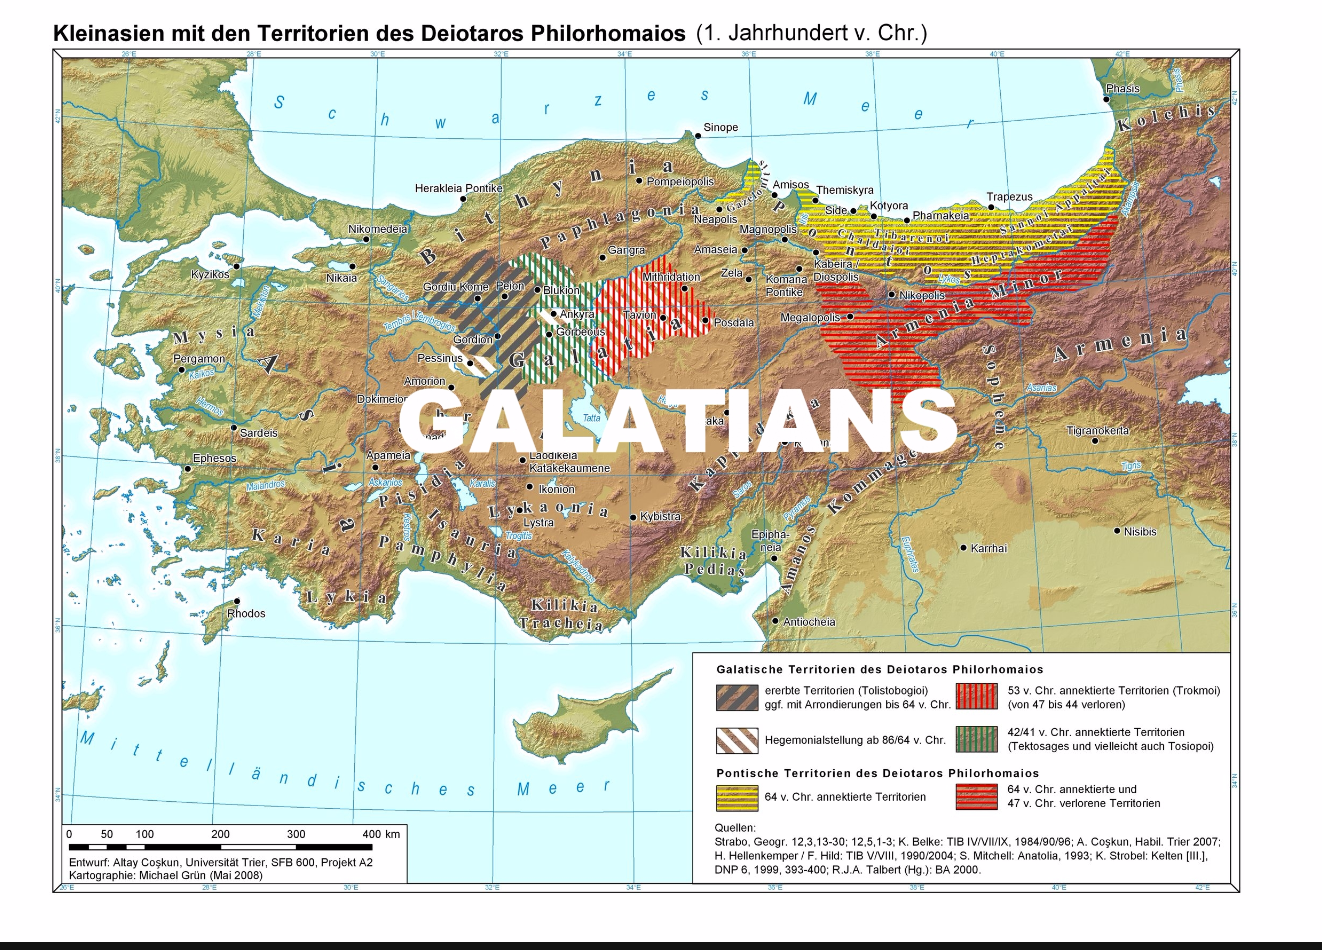 The Little-Known Celts of Asia: Who Were the Galatians?